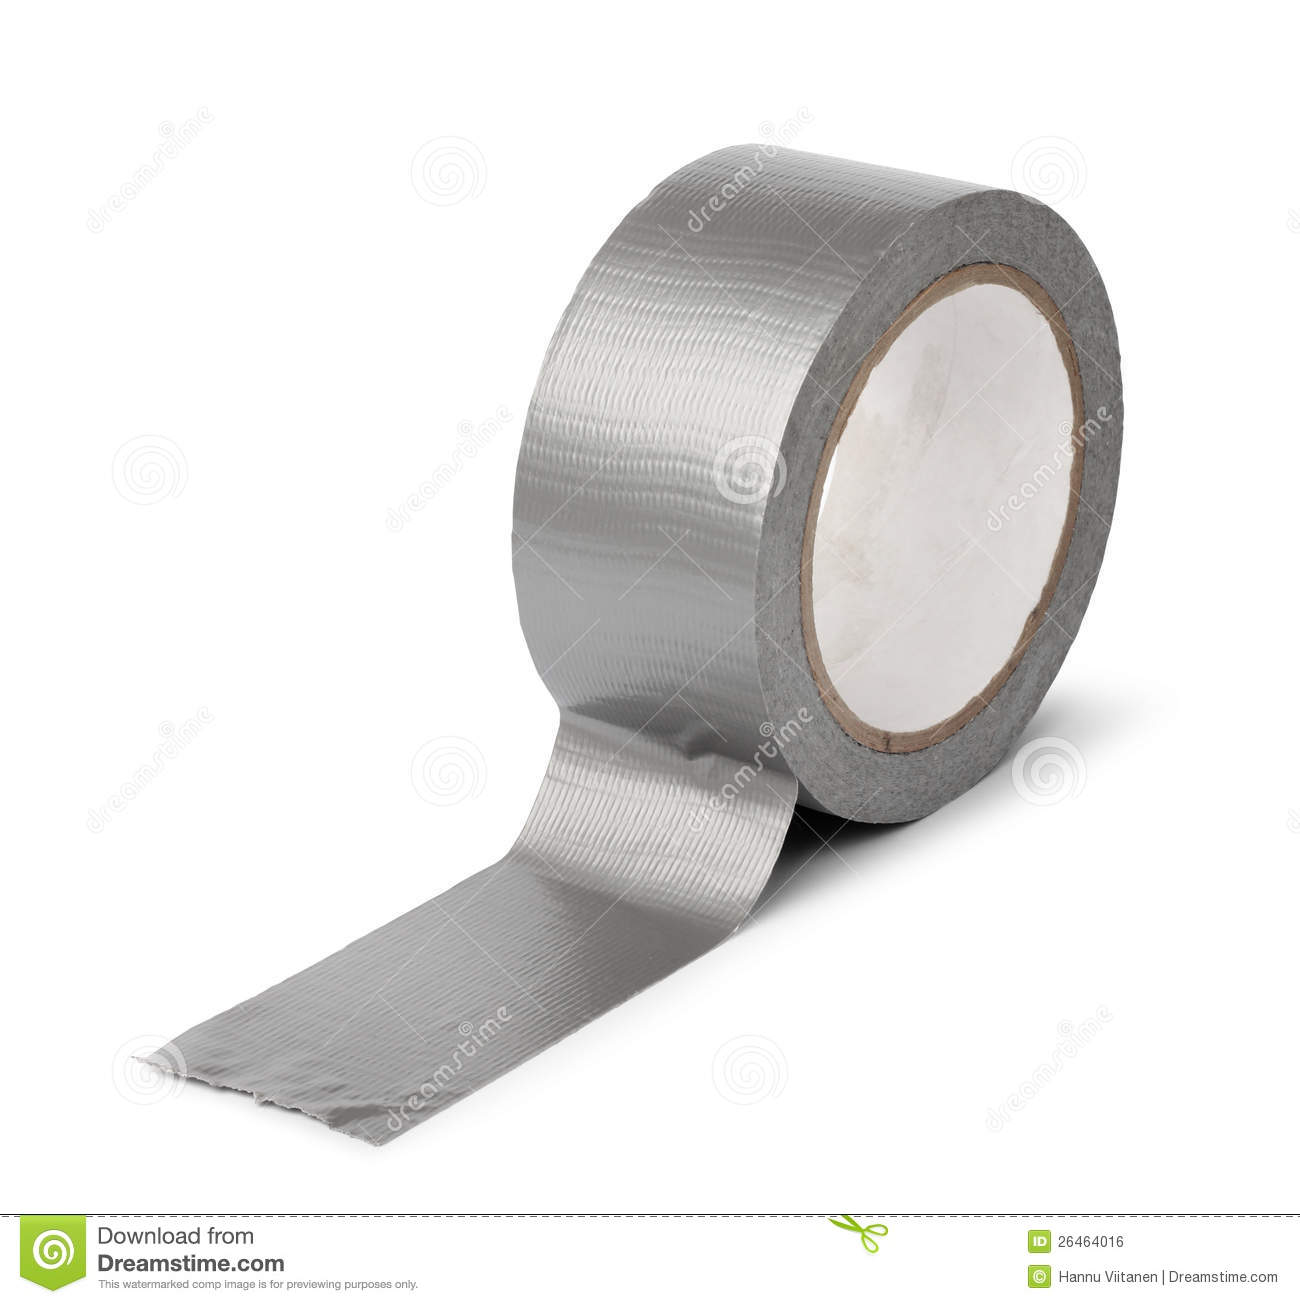 Duct Tape Roll Isolated Royalty Free Stock Image   Image  26464016